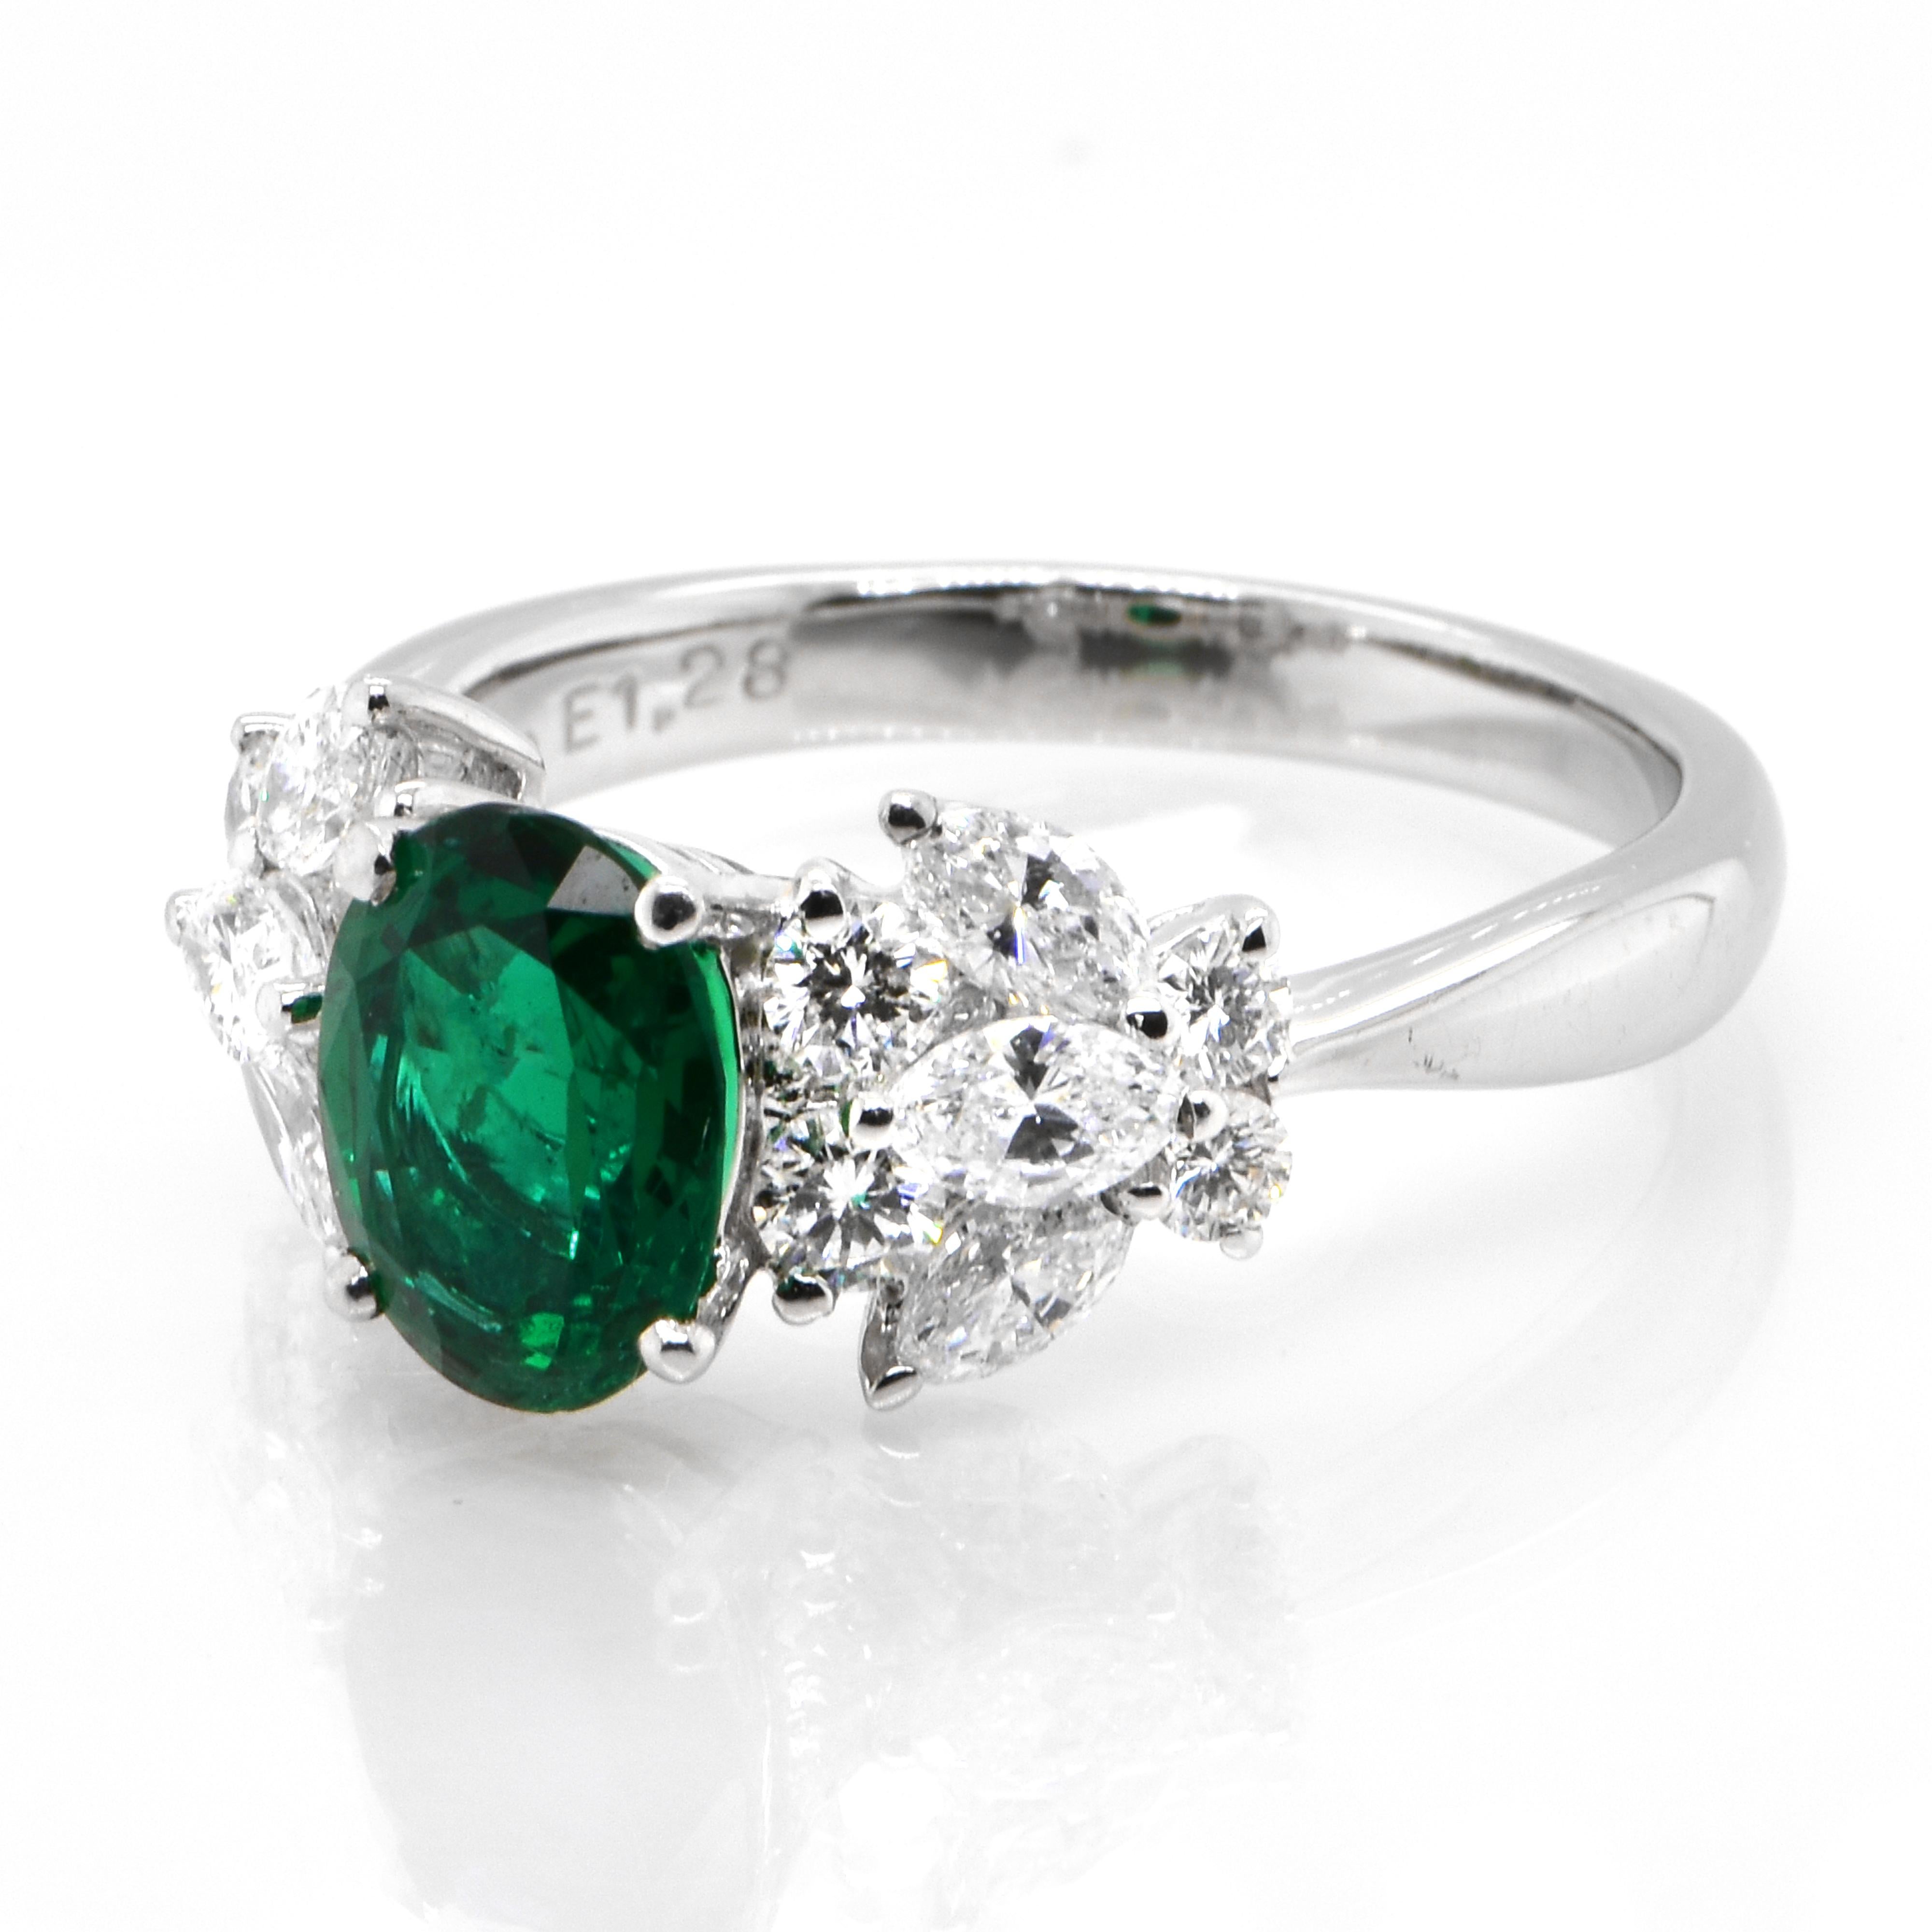 A stunning ring featuring a 1.28 Carat Natural Emerald and 1.04 Carats of Diamond Accents set in Platinum. People have admired emerald’s green for thousands of years. Emeralds have always been associated with the lushest landscapes and the richest